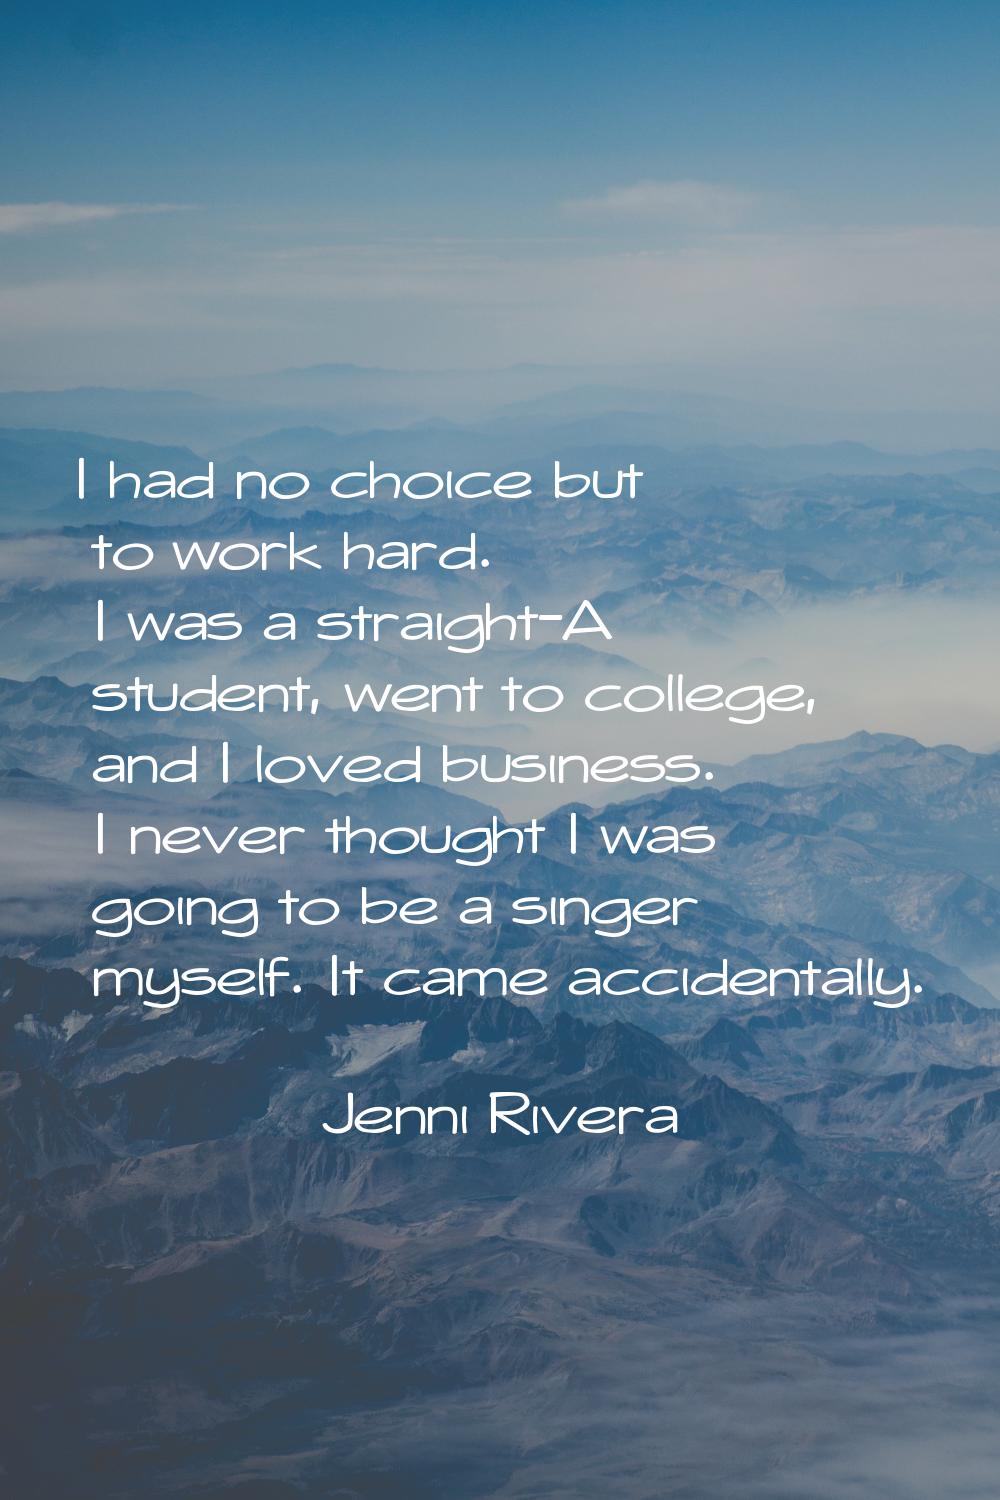 I had no choice but to work hard. I was a straight-A student, went to college, and I loved business